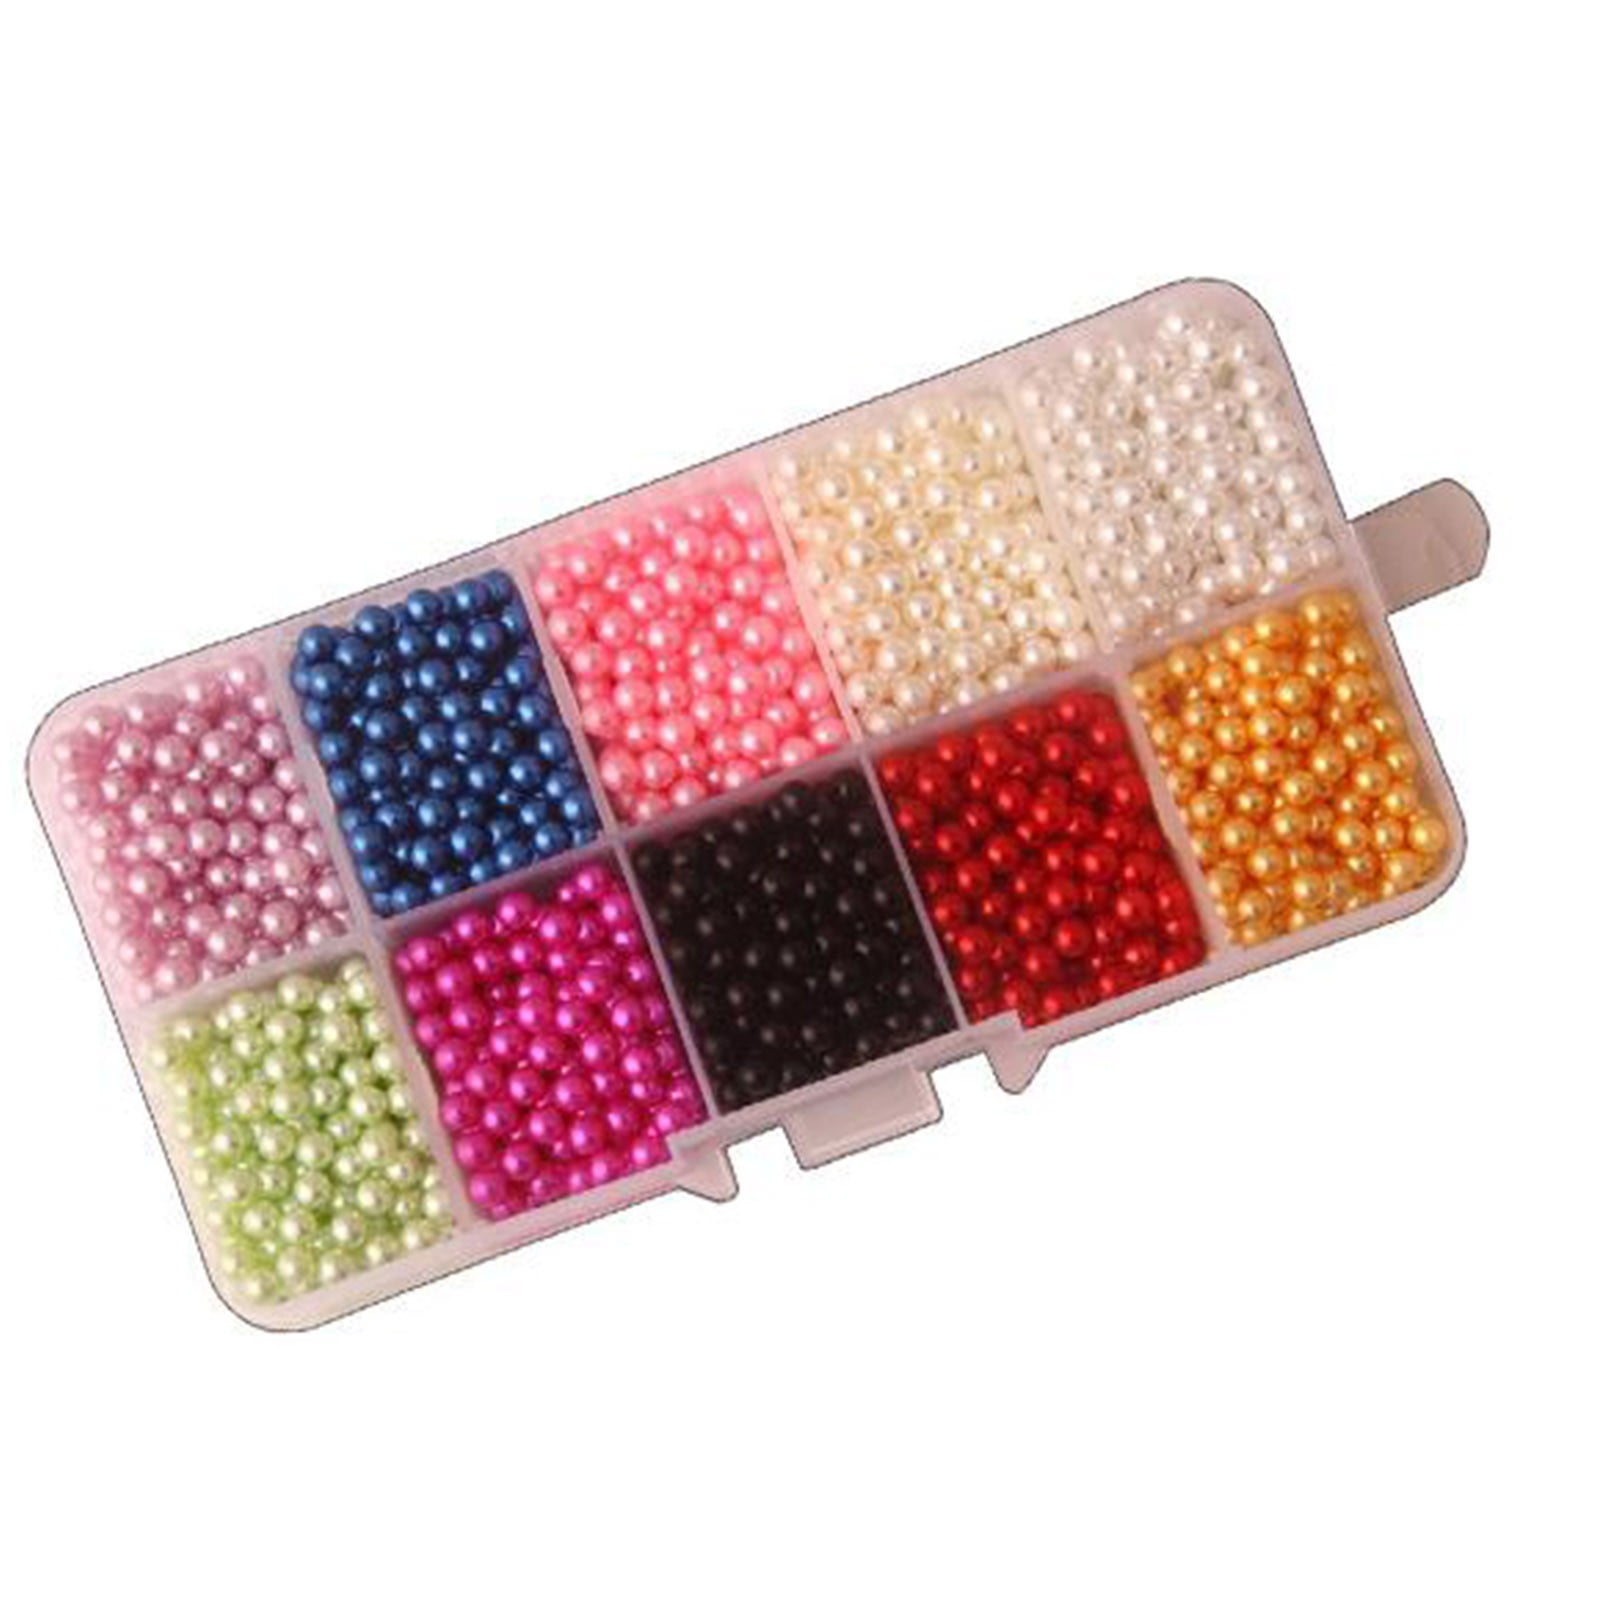 LUTER 770pcs Pearl Beads for Bracelets Making, Round Pearls Beads Craft Kit  with Storage Box Accessories Beads for Bracelet Making Ornament Craft